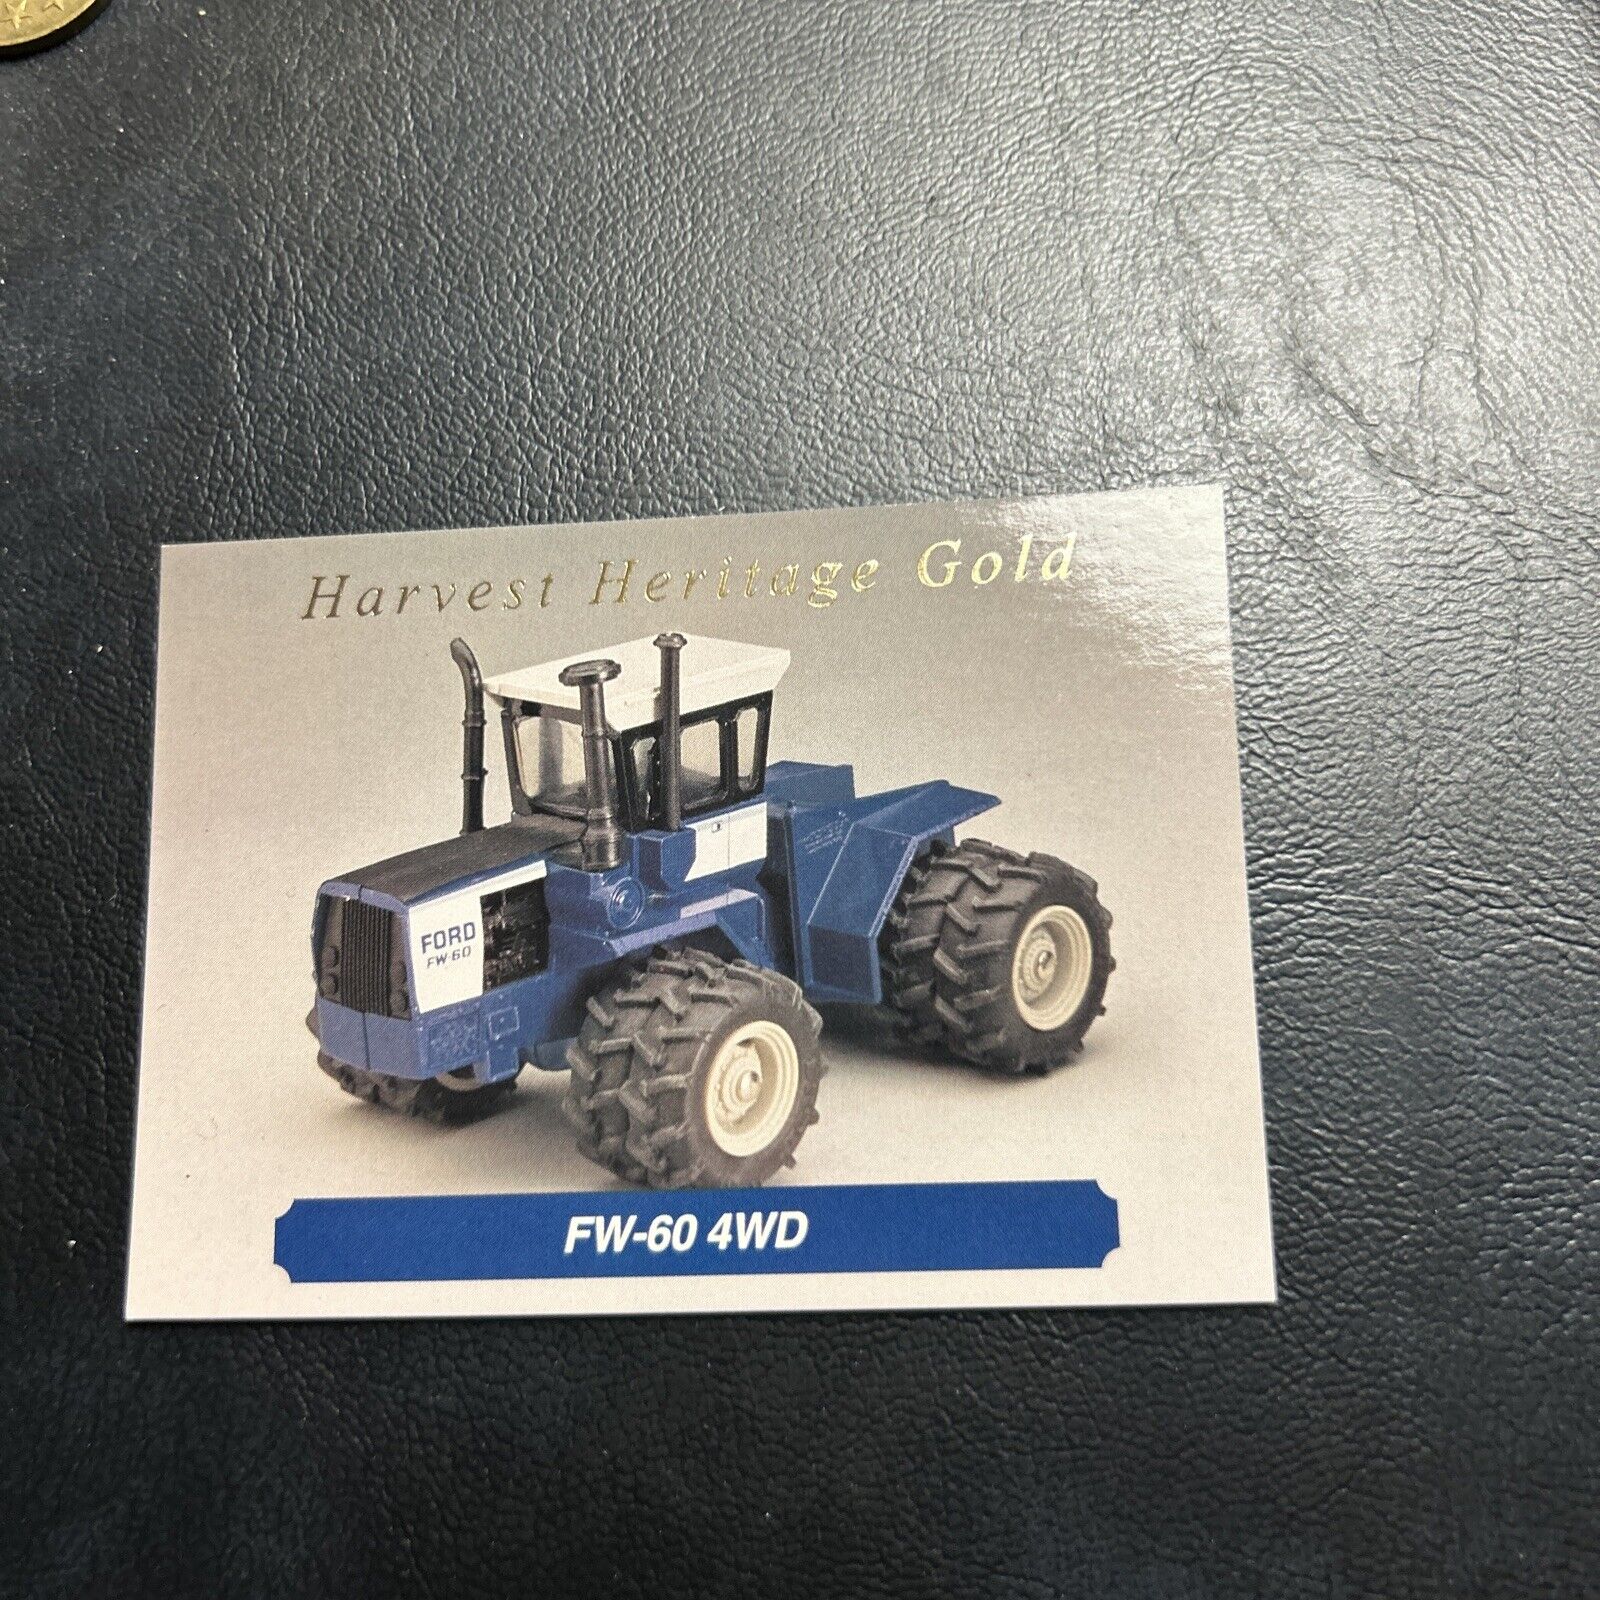 Jb23 Harvest Heritage Ford 1995 Ertl #sf3 FW 60 4wd Tractor Gold